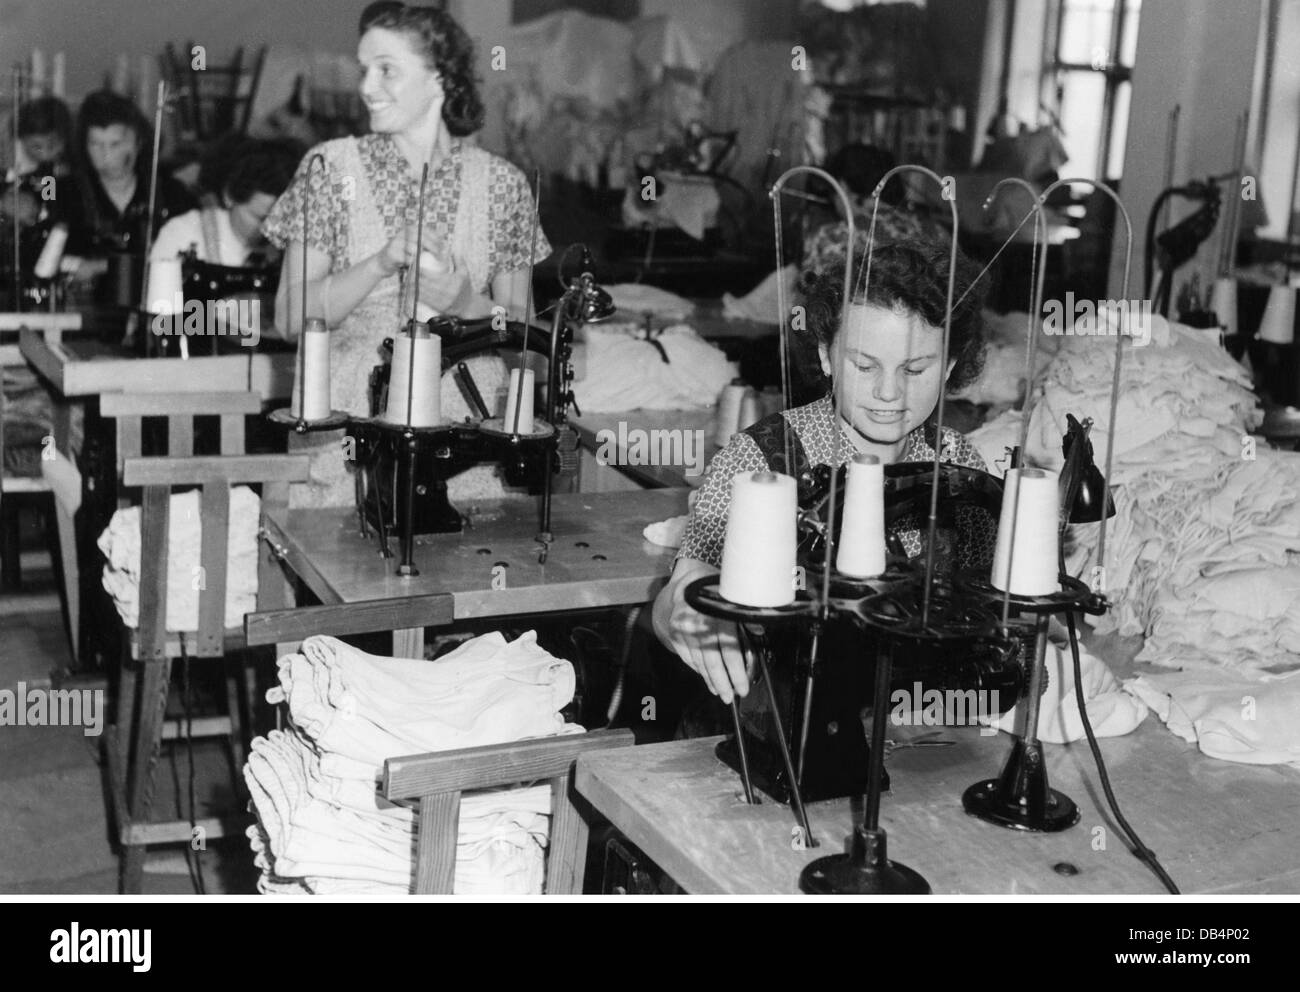 post war period, people, German workers in cotton mill, Stockholm, early 1950s, Additional-Rights-Clearences-Not Available Stock Photo